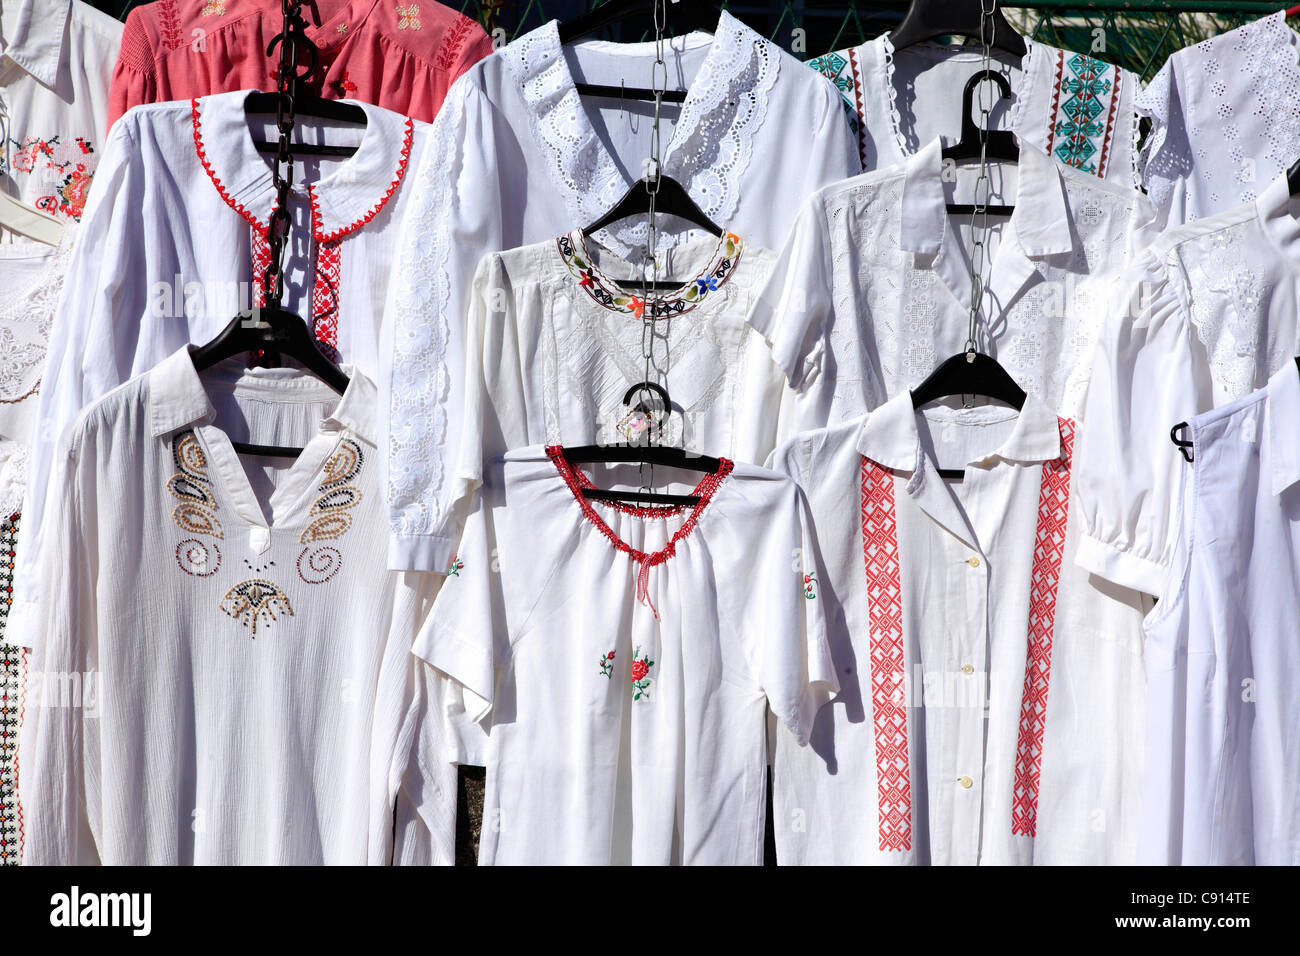 Shops in Donji Milanovac offer traditionally embroidered shirts and many other embroidered or handmade goods for sale. Stock Photo